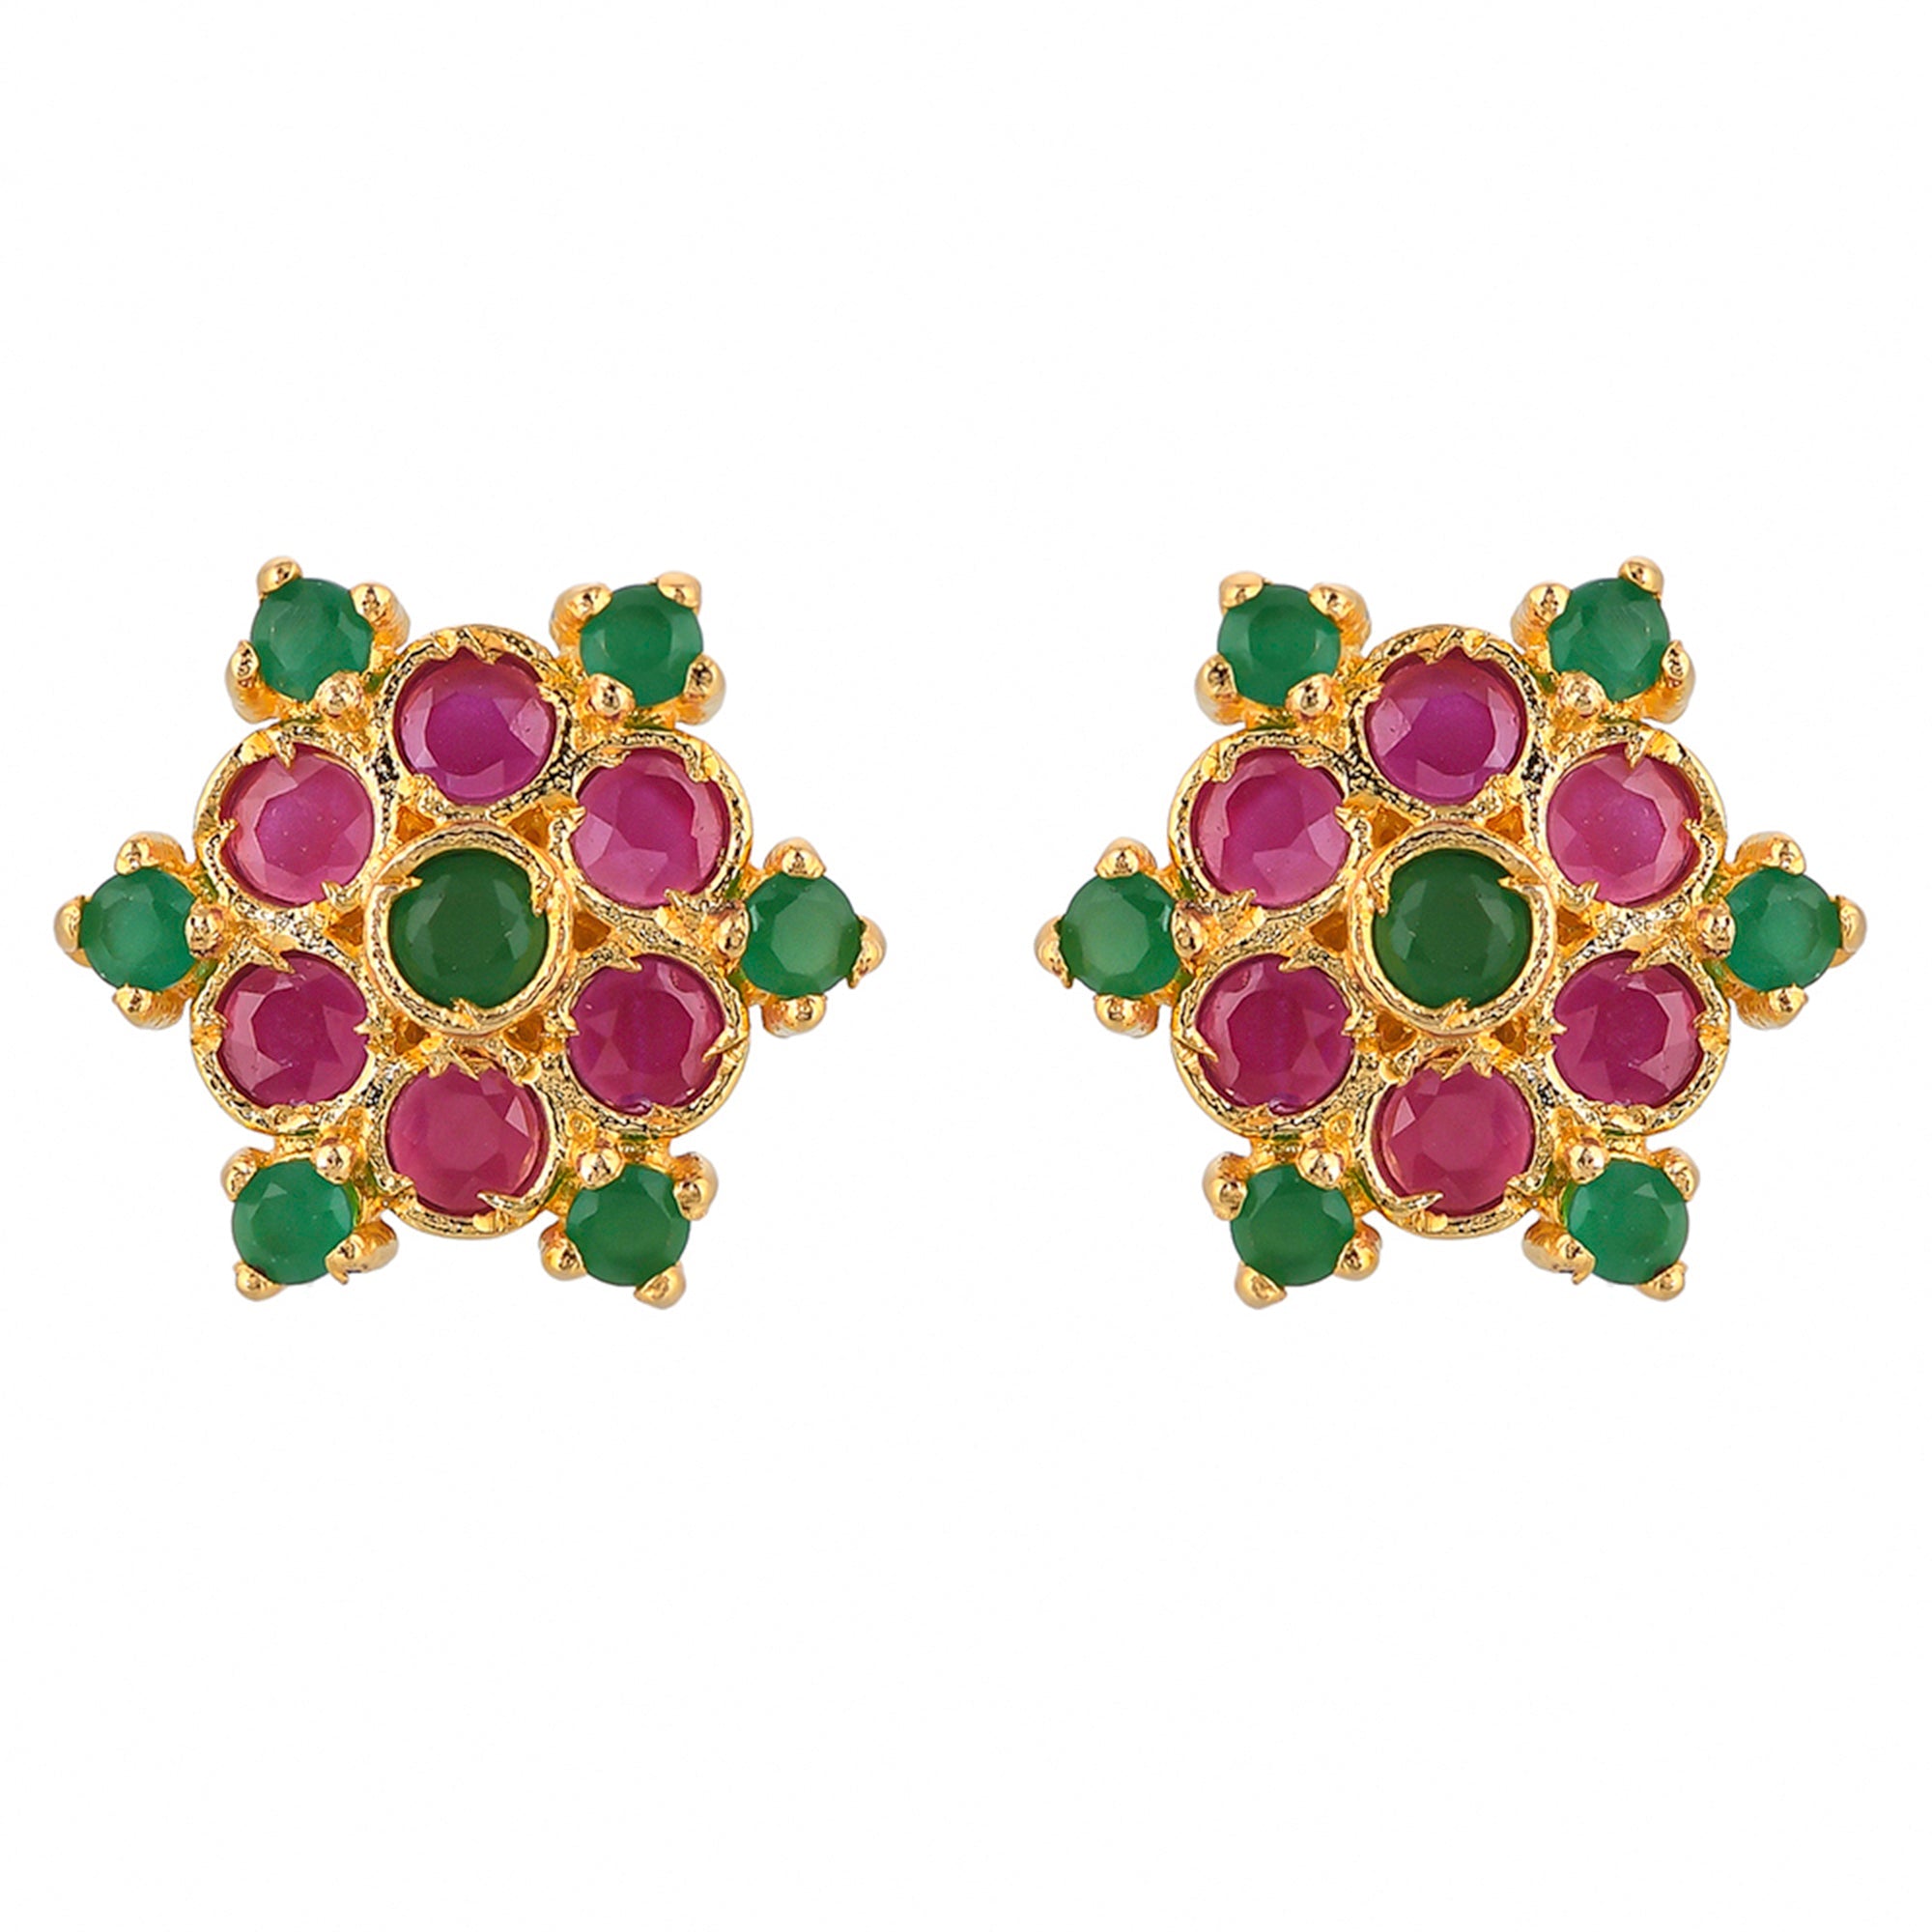 Women's Round Cut Pink And Green Cz Stud Earrings - Voylla